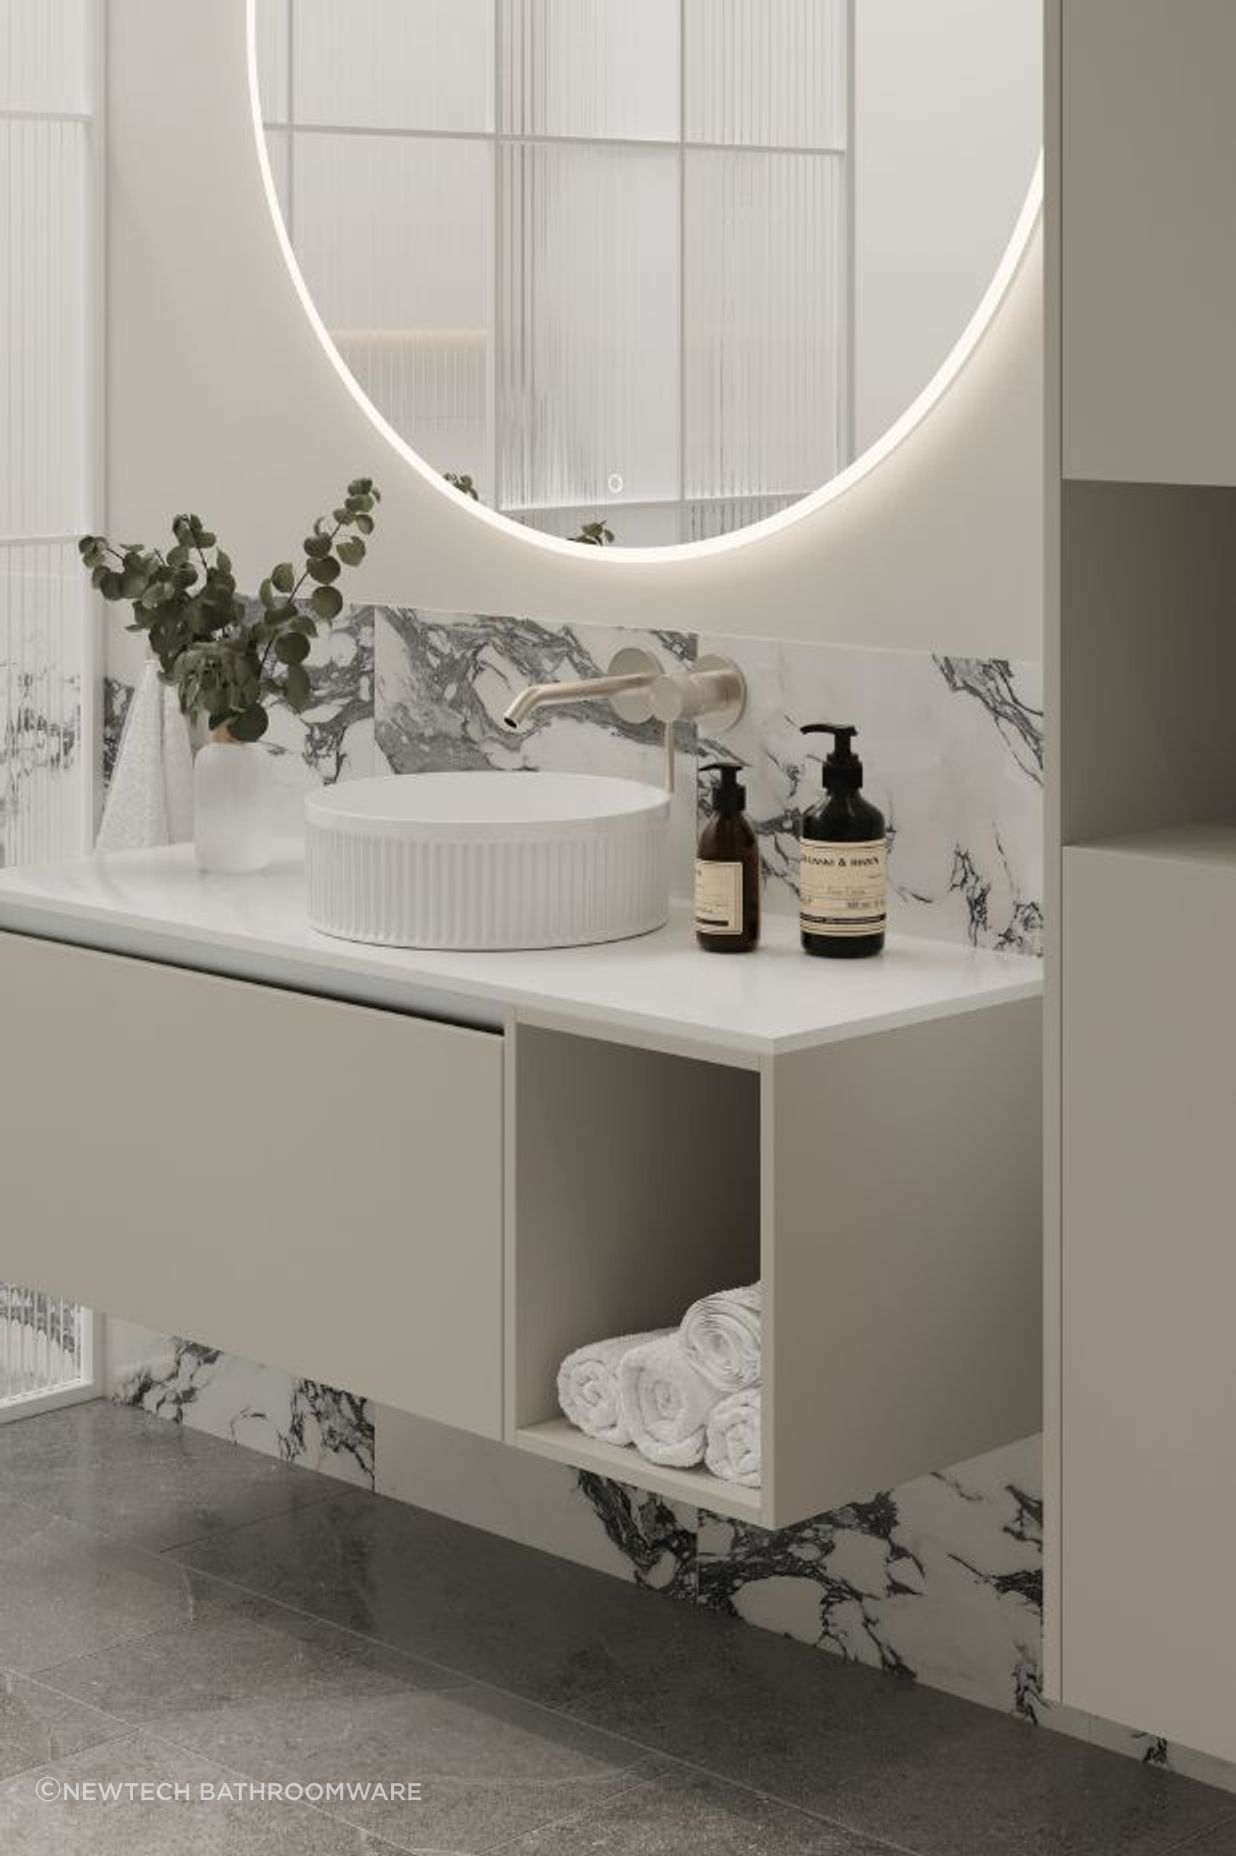 The Savanna Luxe Wall Vanity in shade 'Dawn Grey' is designed with a StoneCast slab top and an exposed basin